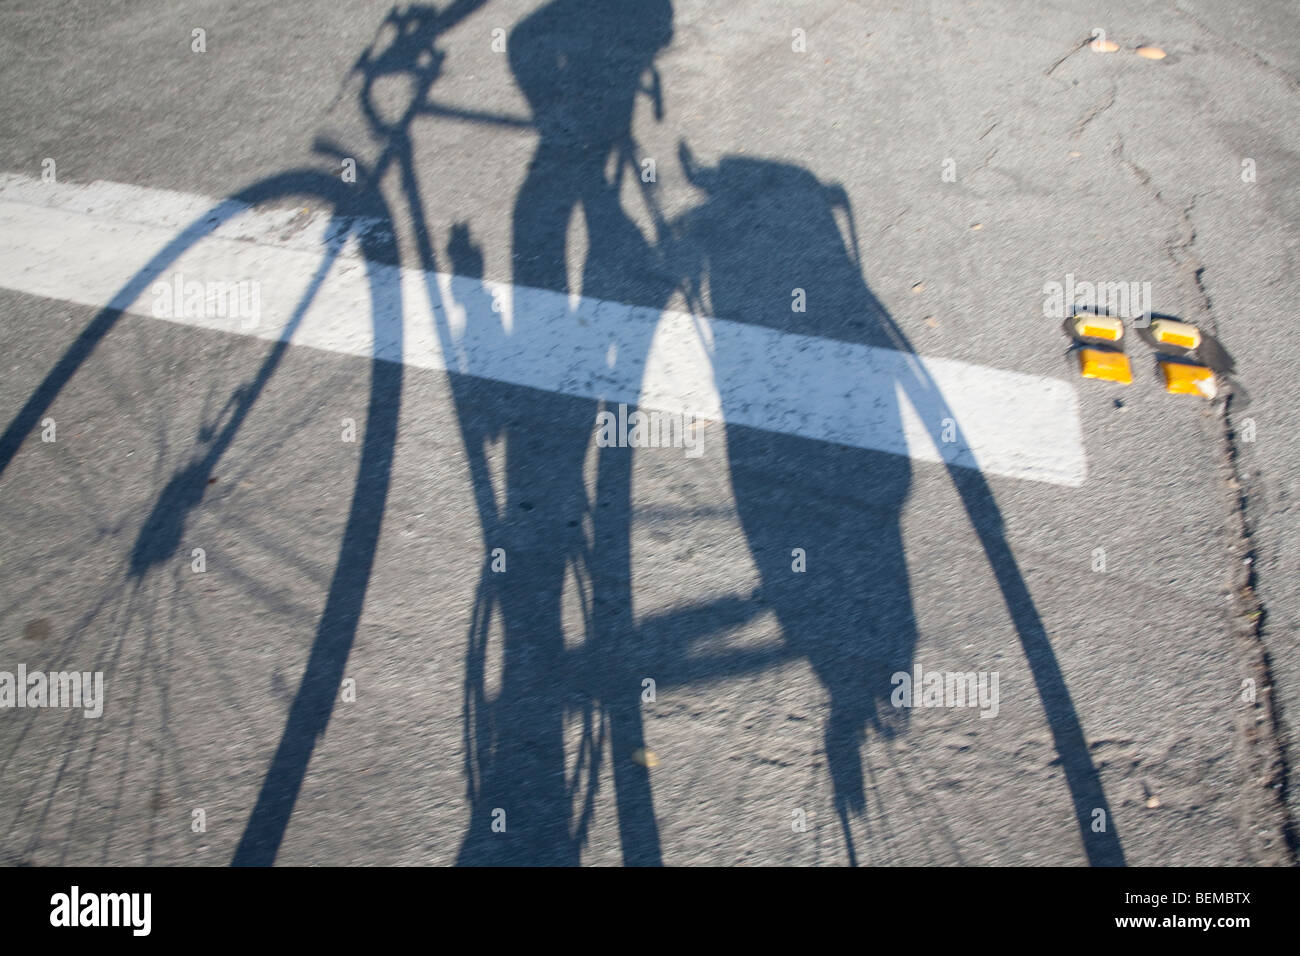 Bicyclist's long shadow falling on road. The cyclists is carrying gear in panniers next to the rear wheel. Stock Photo